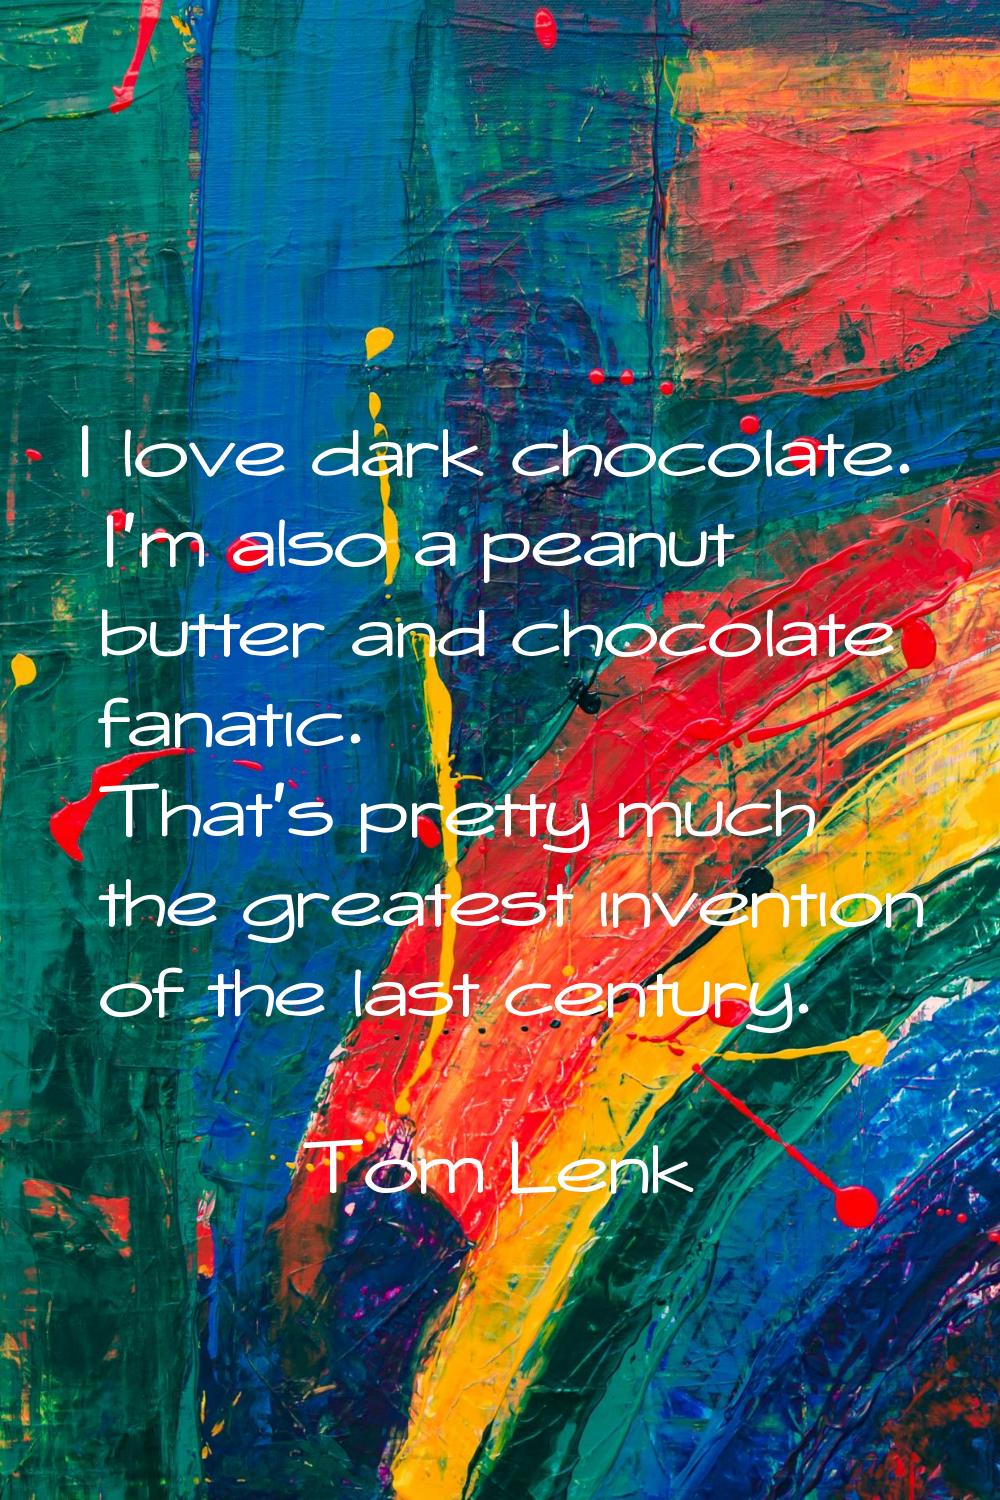 I love dark chocolate. I'm also a peanut butter and chocolate fanatic. That's pretty much the great